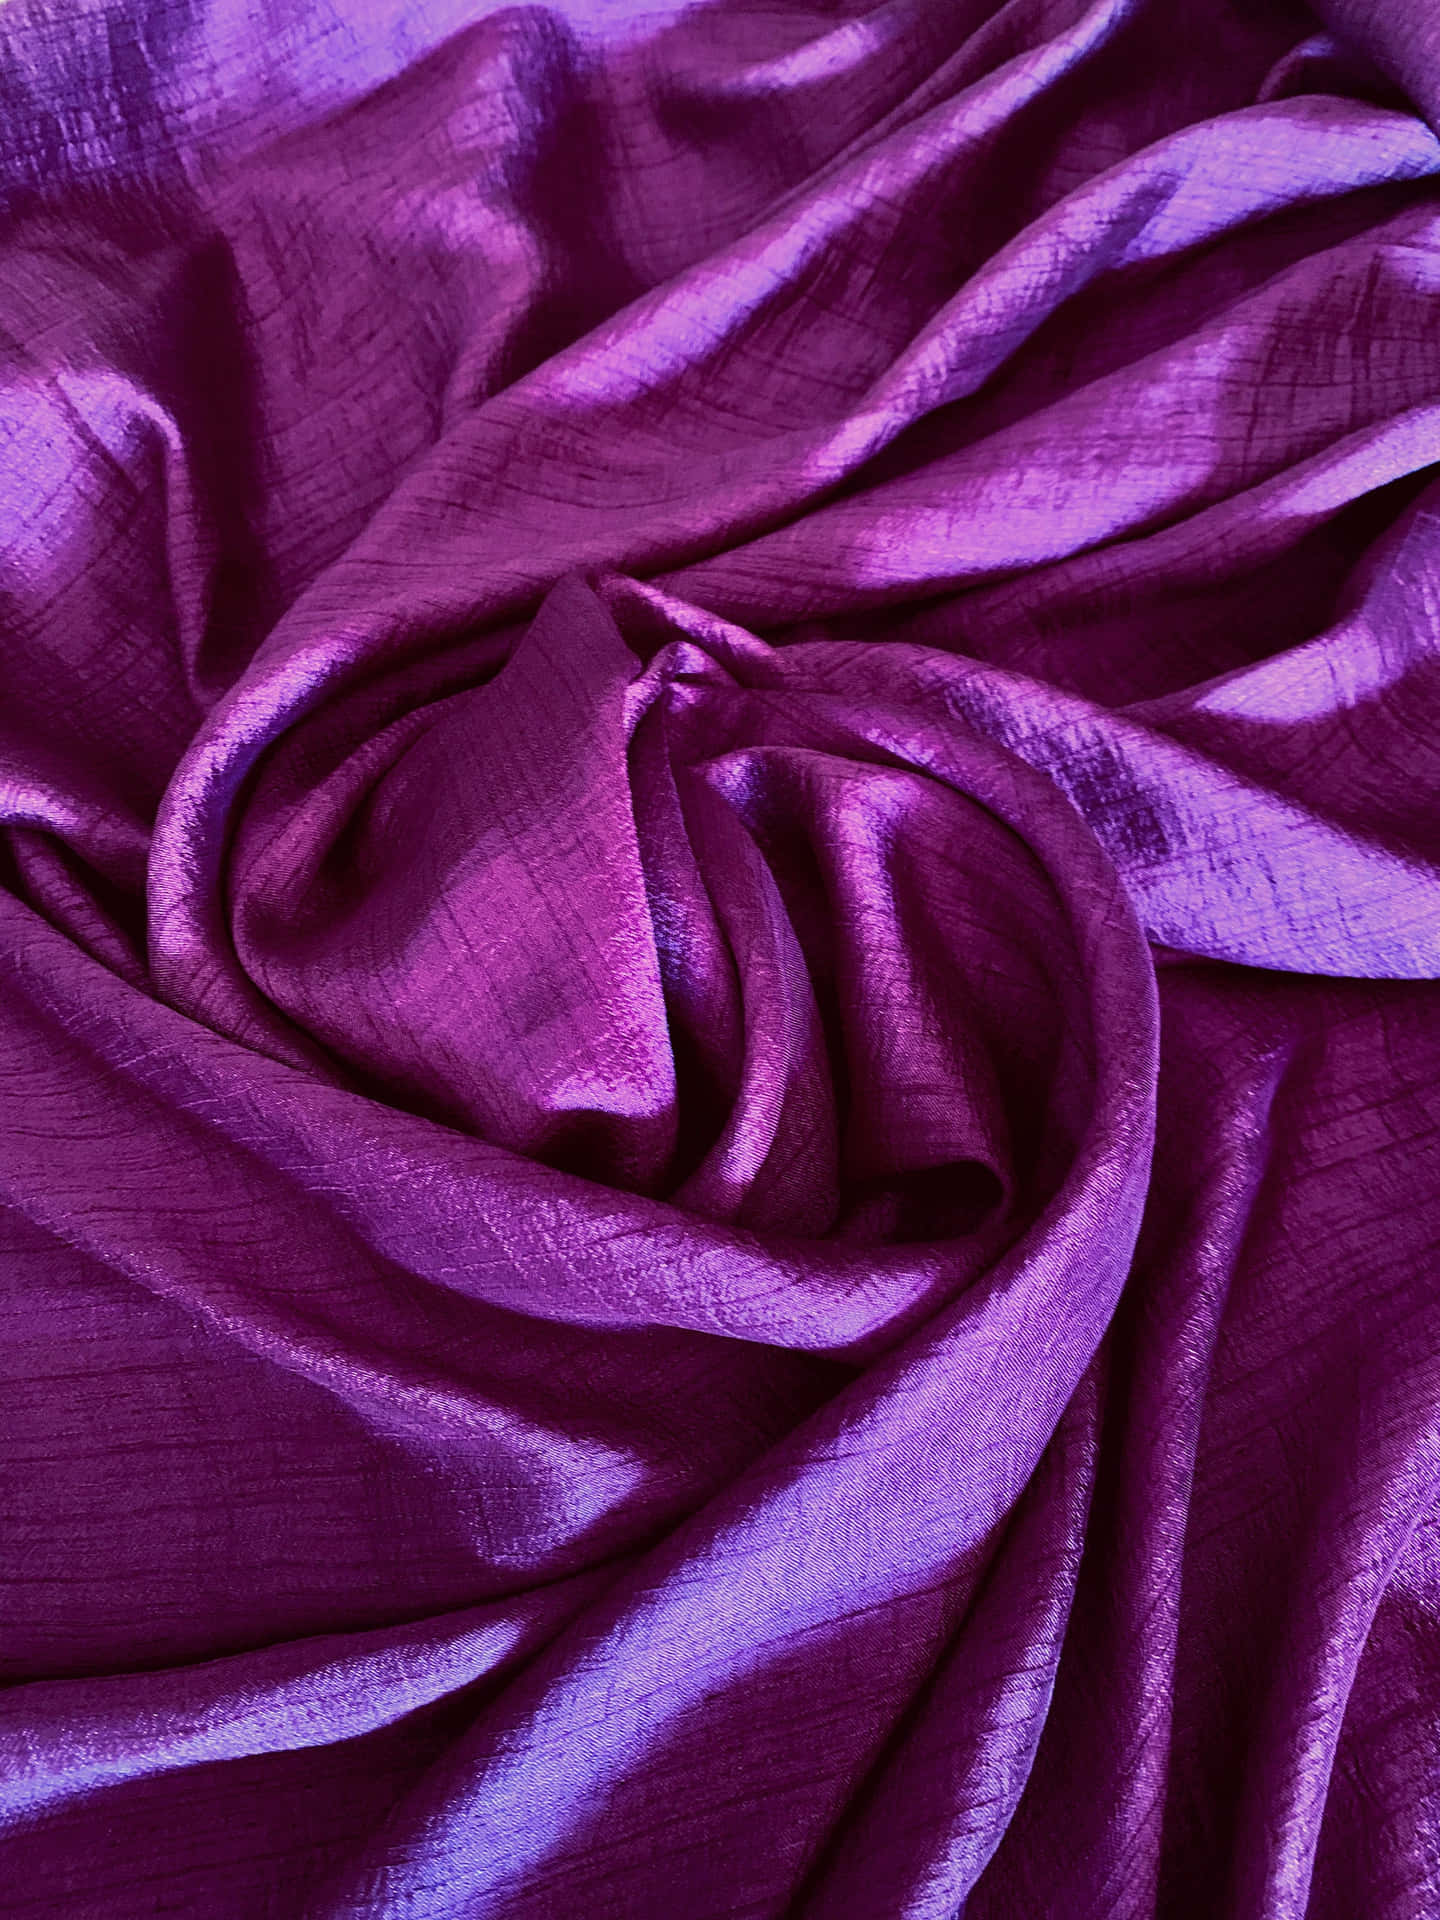 Feel luxurious with this bright and beautiful Purple Satin wallpaper. Wallpaper